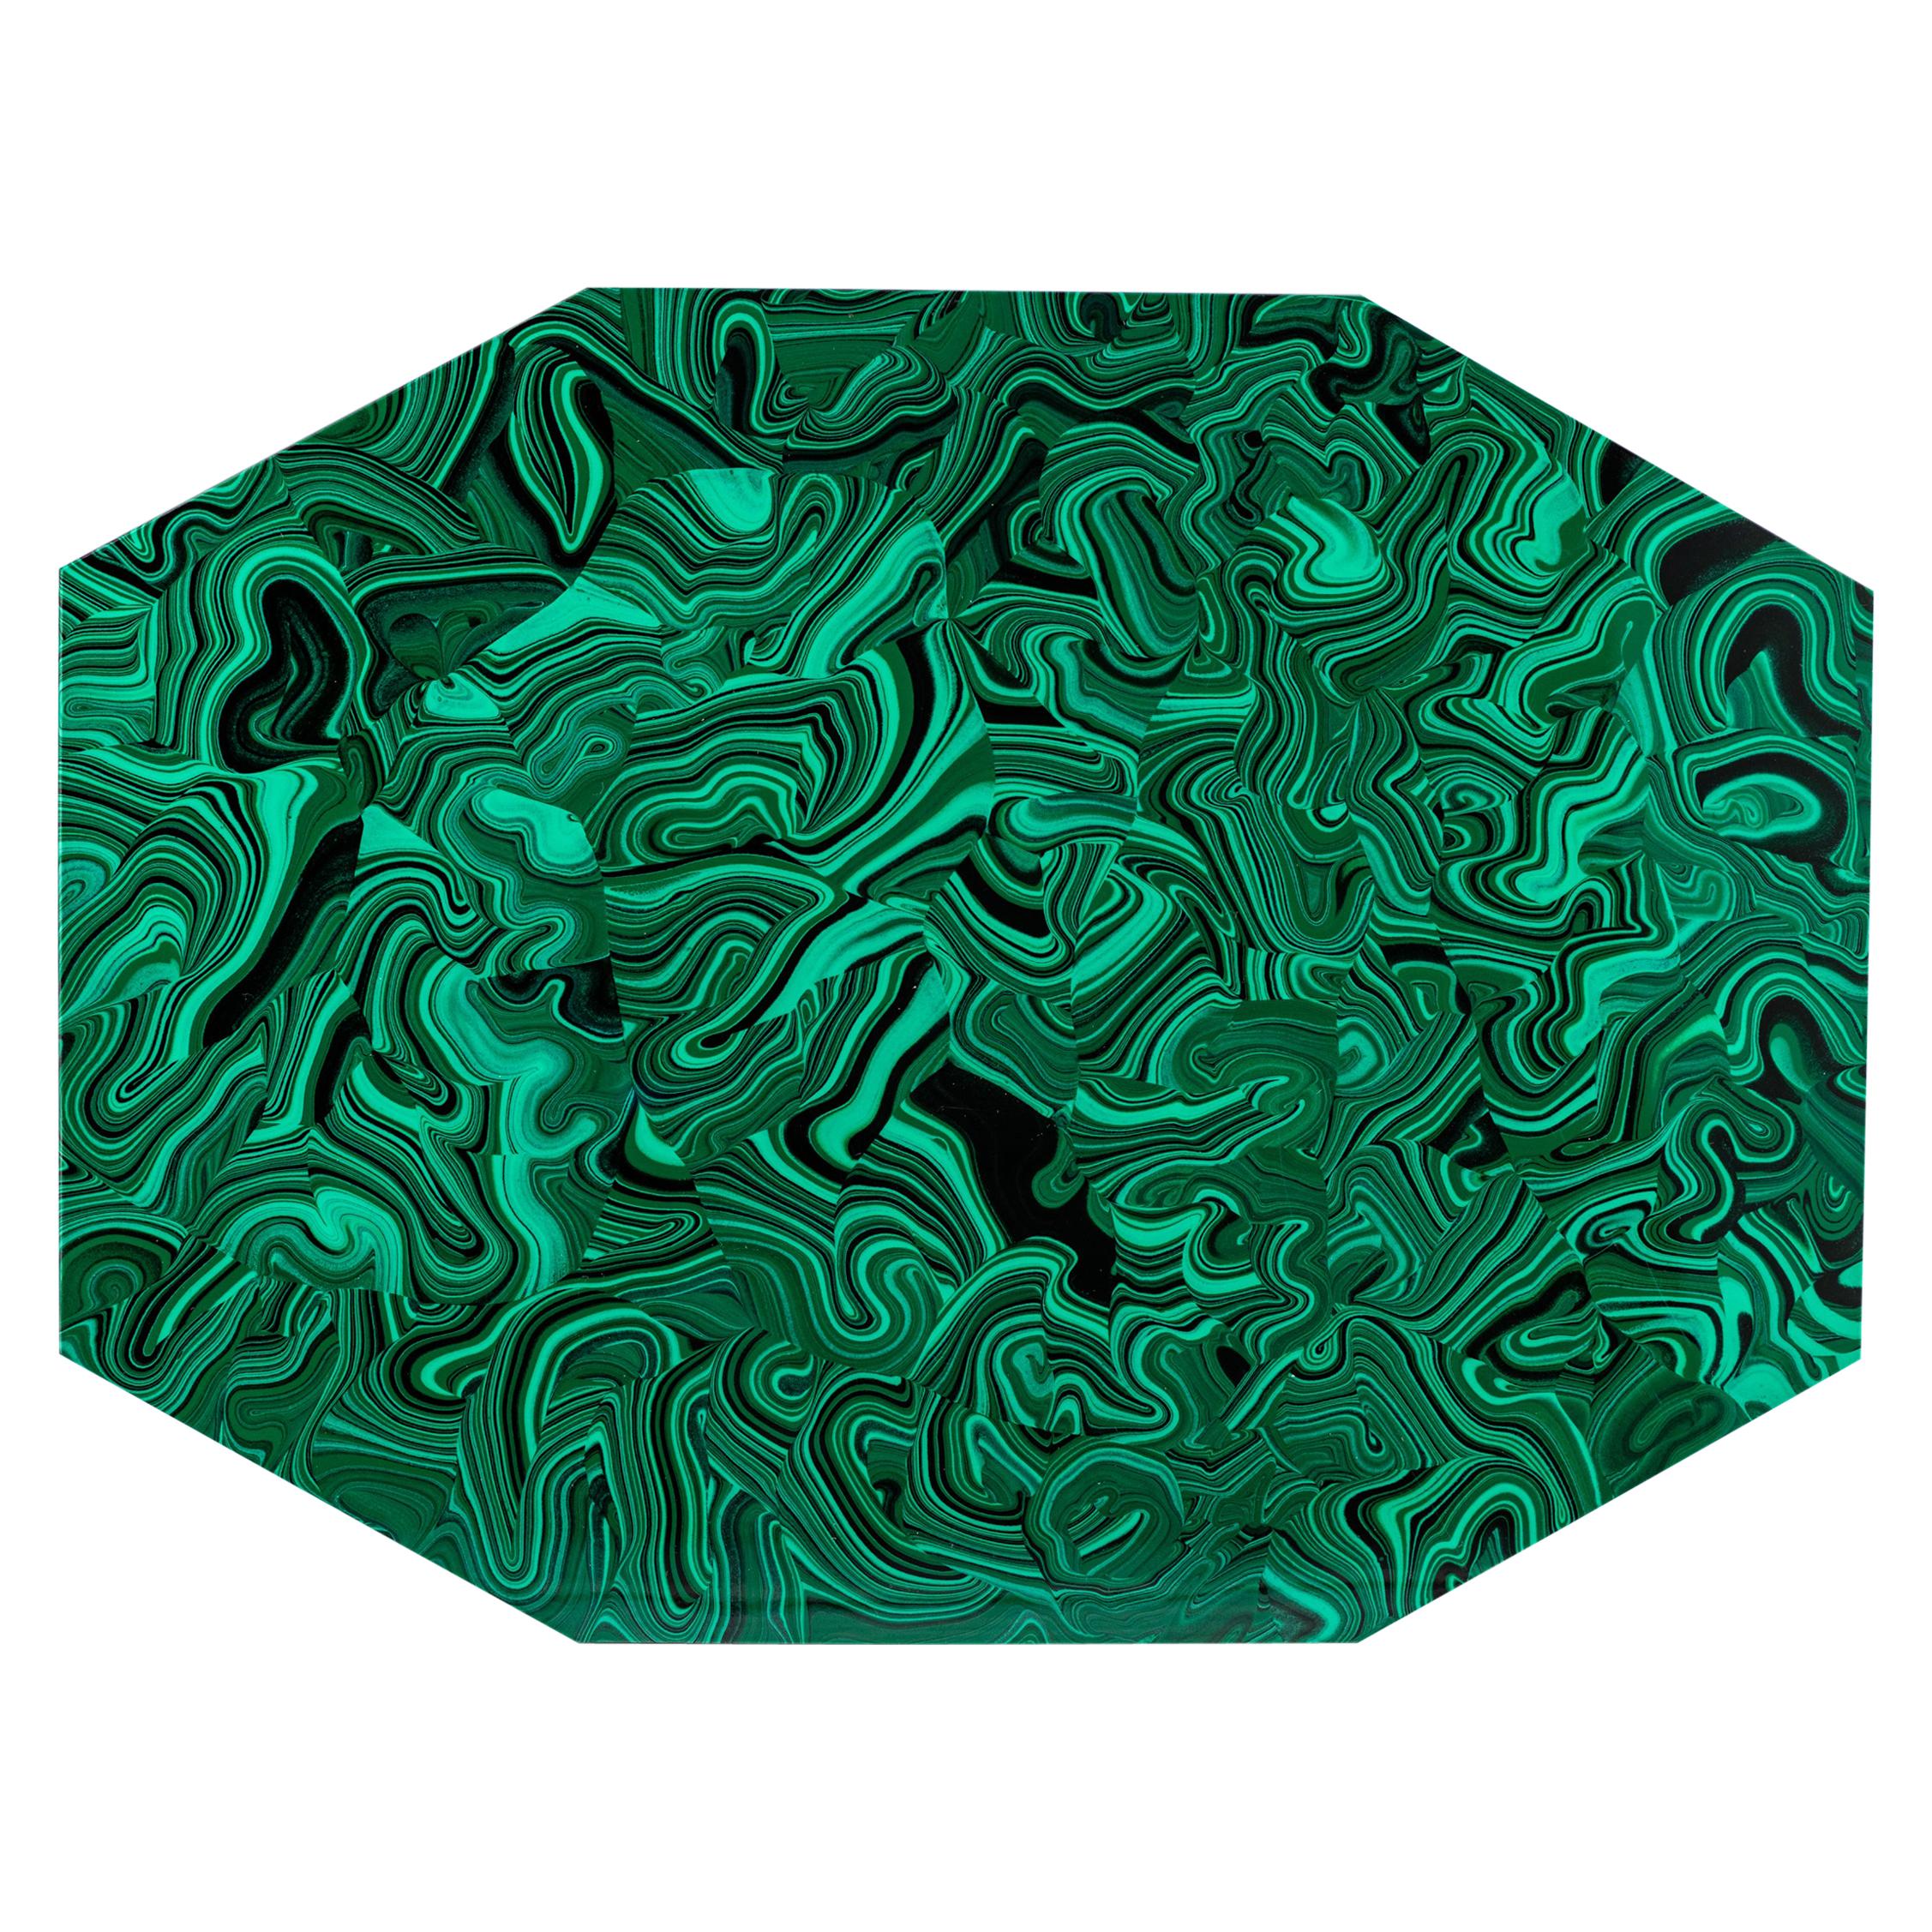 Set of ten, Imperial Stone faux malachite placemats, acrylic, signed. Glam octagonal acrylic placemats with white felt backs. Signed with the manufacture's foil label on the felt backs: Imperial Stone LTD. One has an old Bloomingdales label.